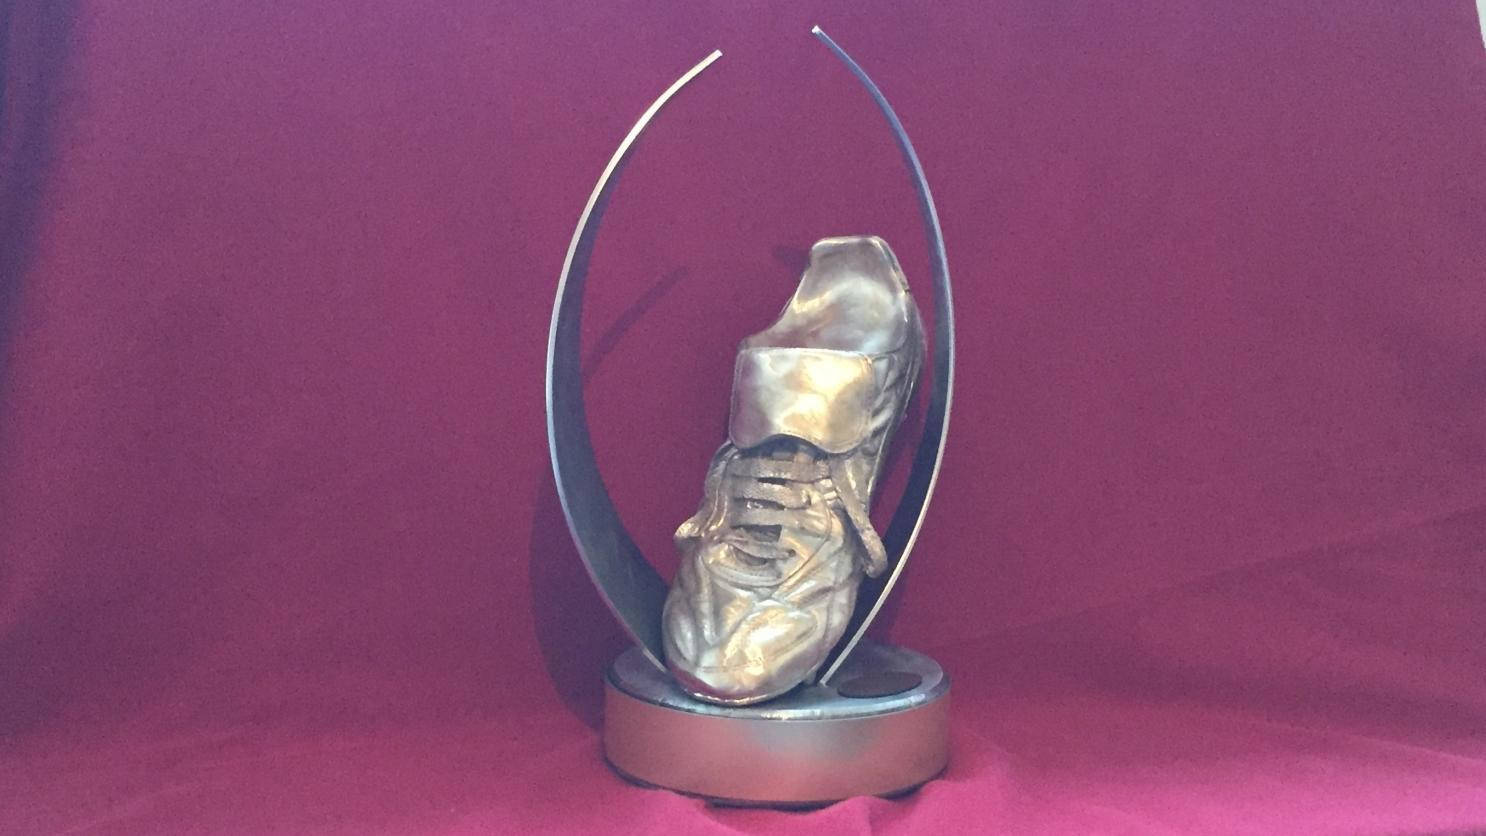 International Rugby League has unveiled new golden boot trophies ©IRL